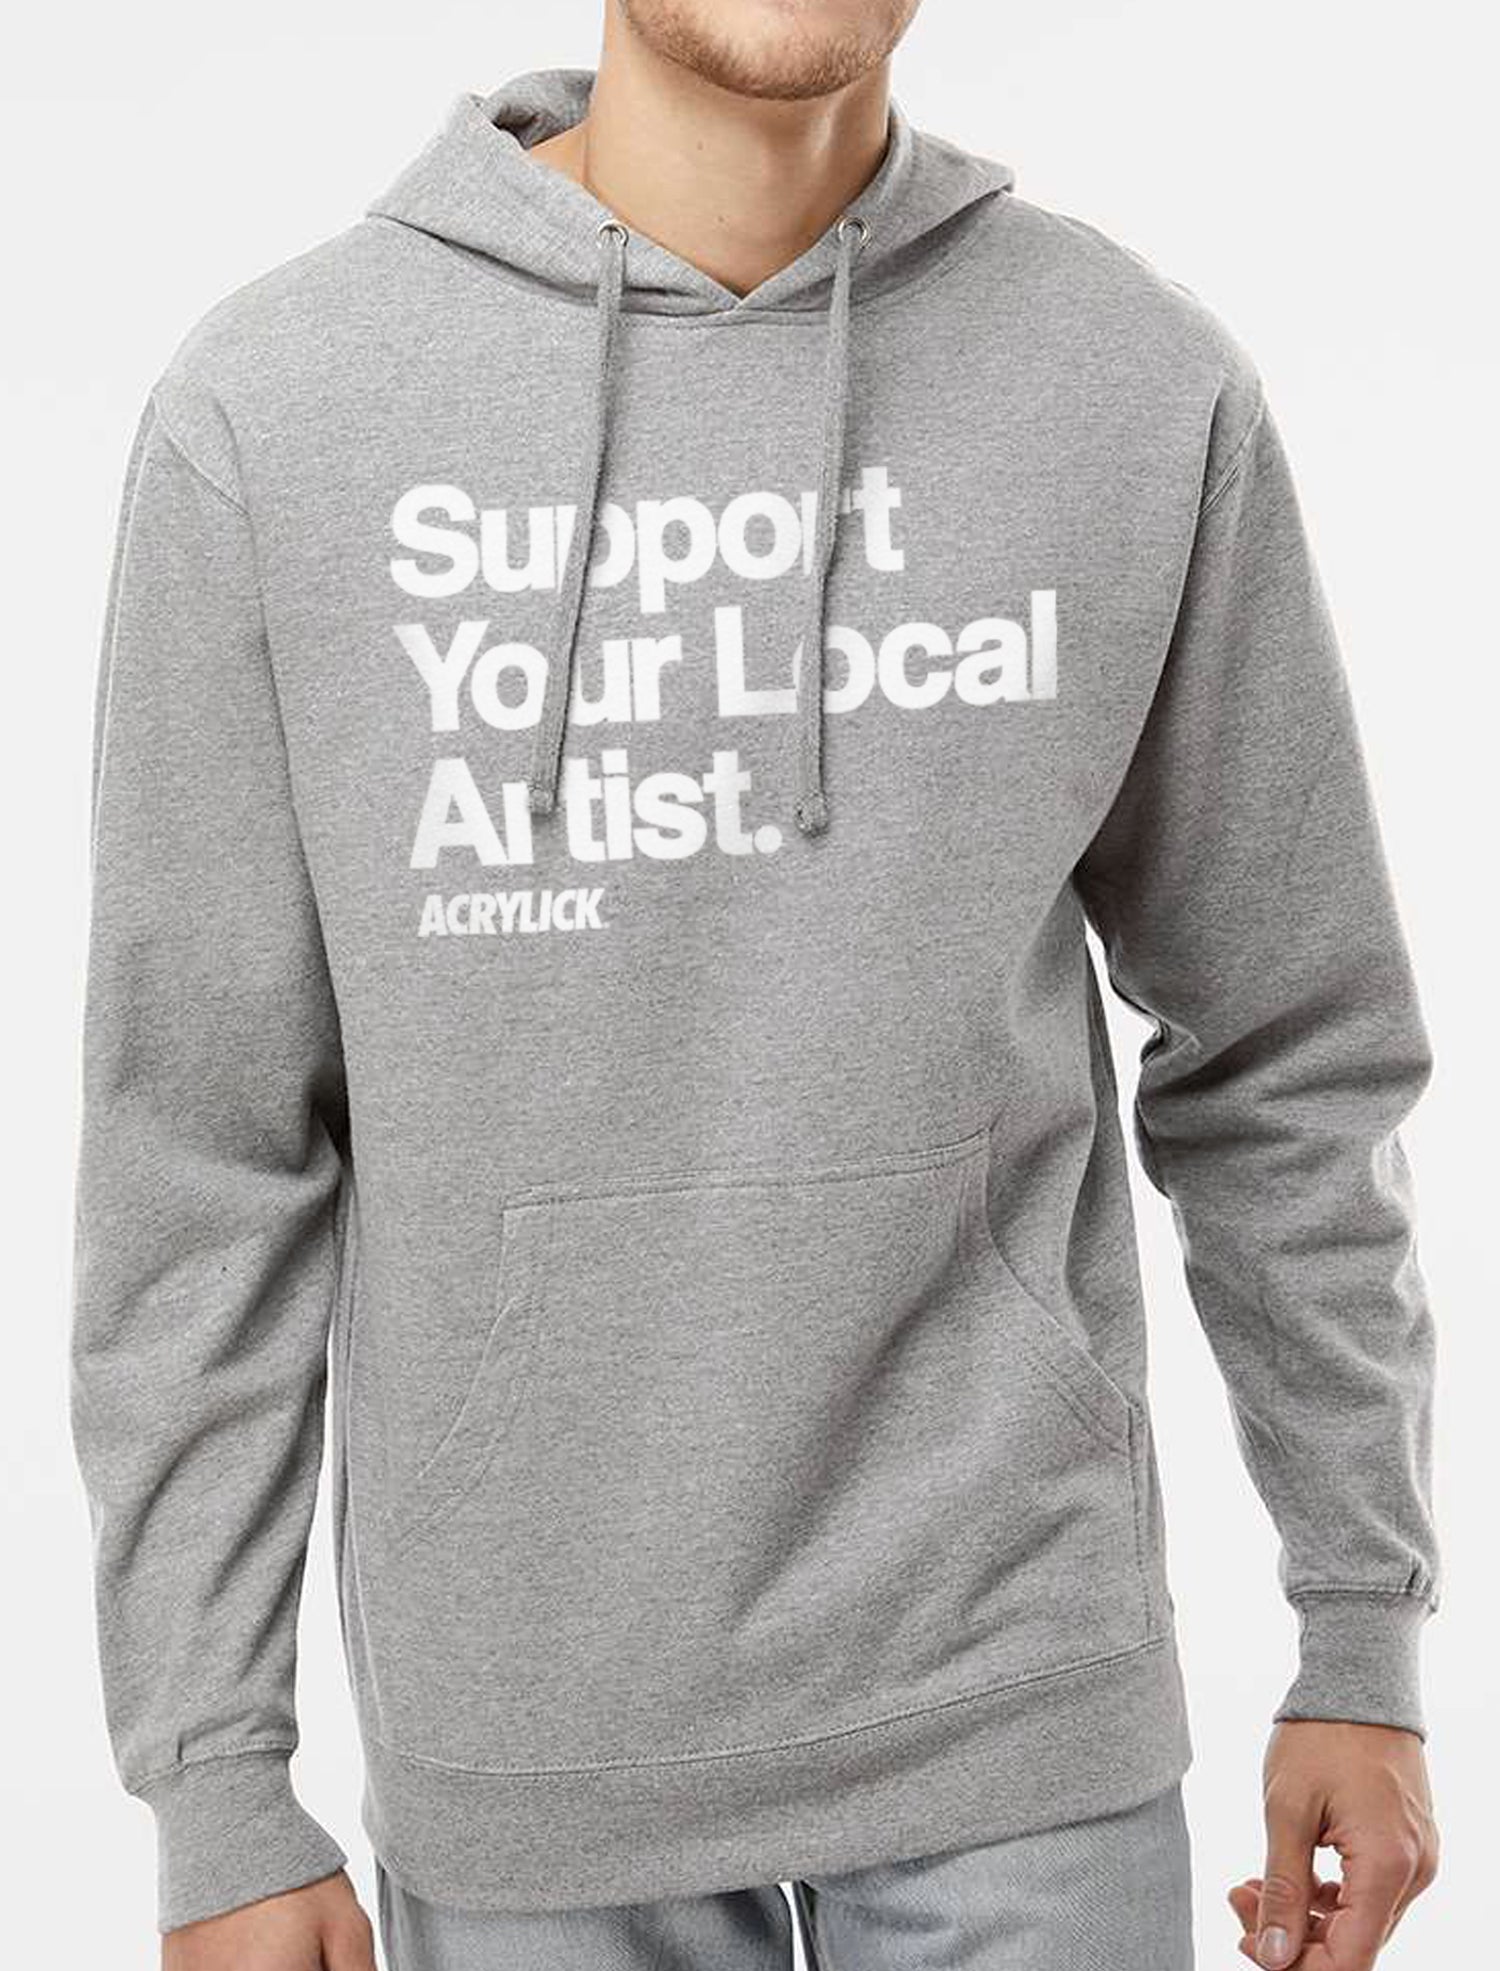 Acrylick Goods - Support Your Local Artist Hoodie - Available in Heather Grey and Navy Hoodies